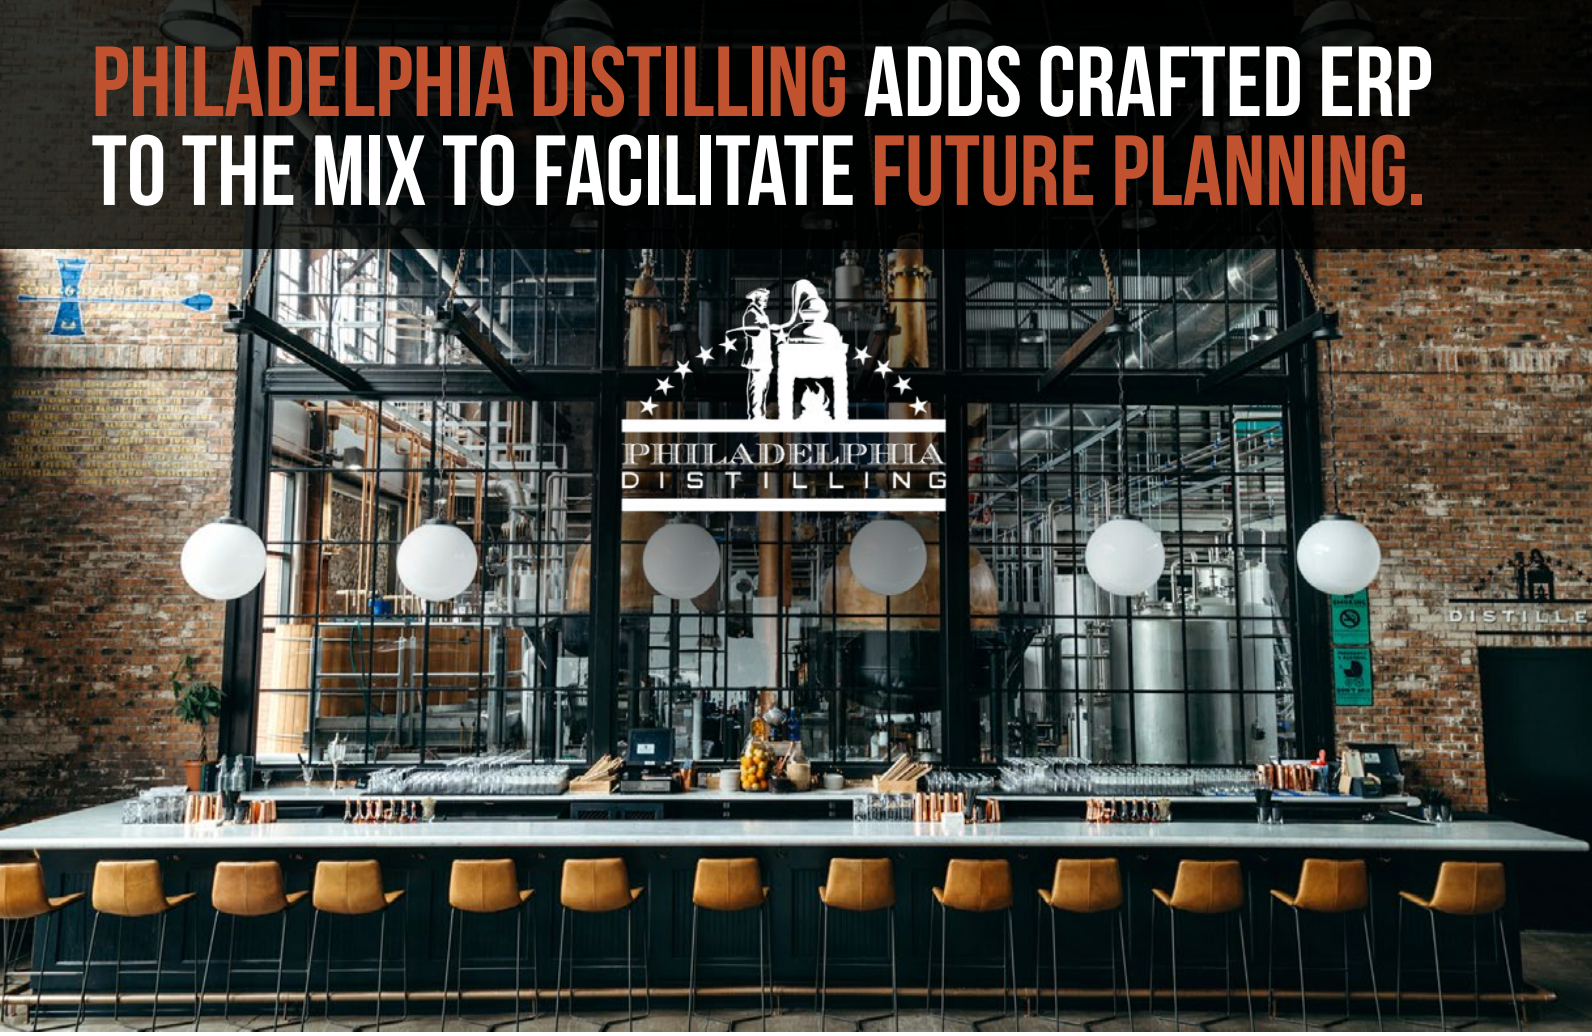 Philadelphia distilling adds crafted erp to the mix to facilitate future planning.